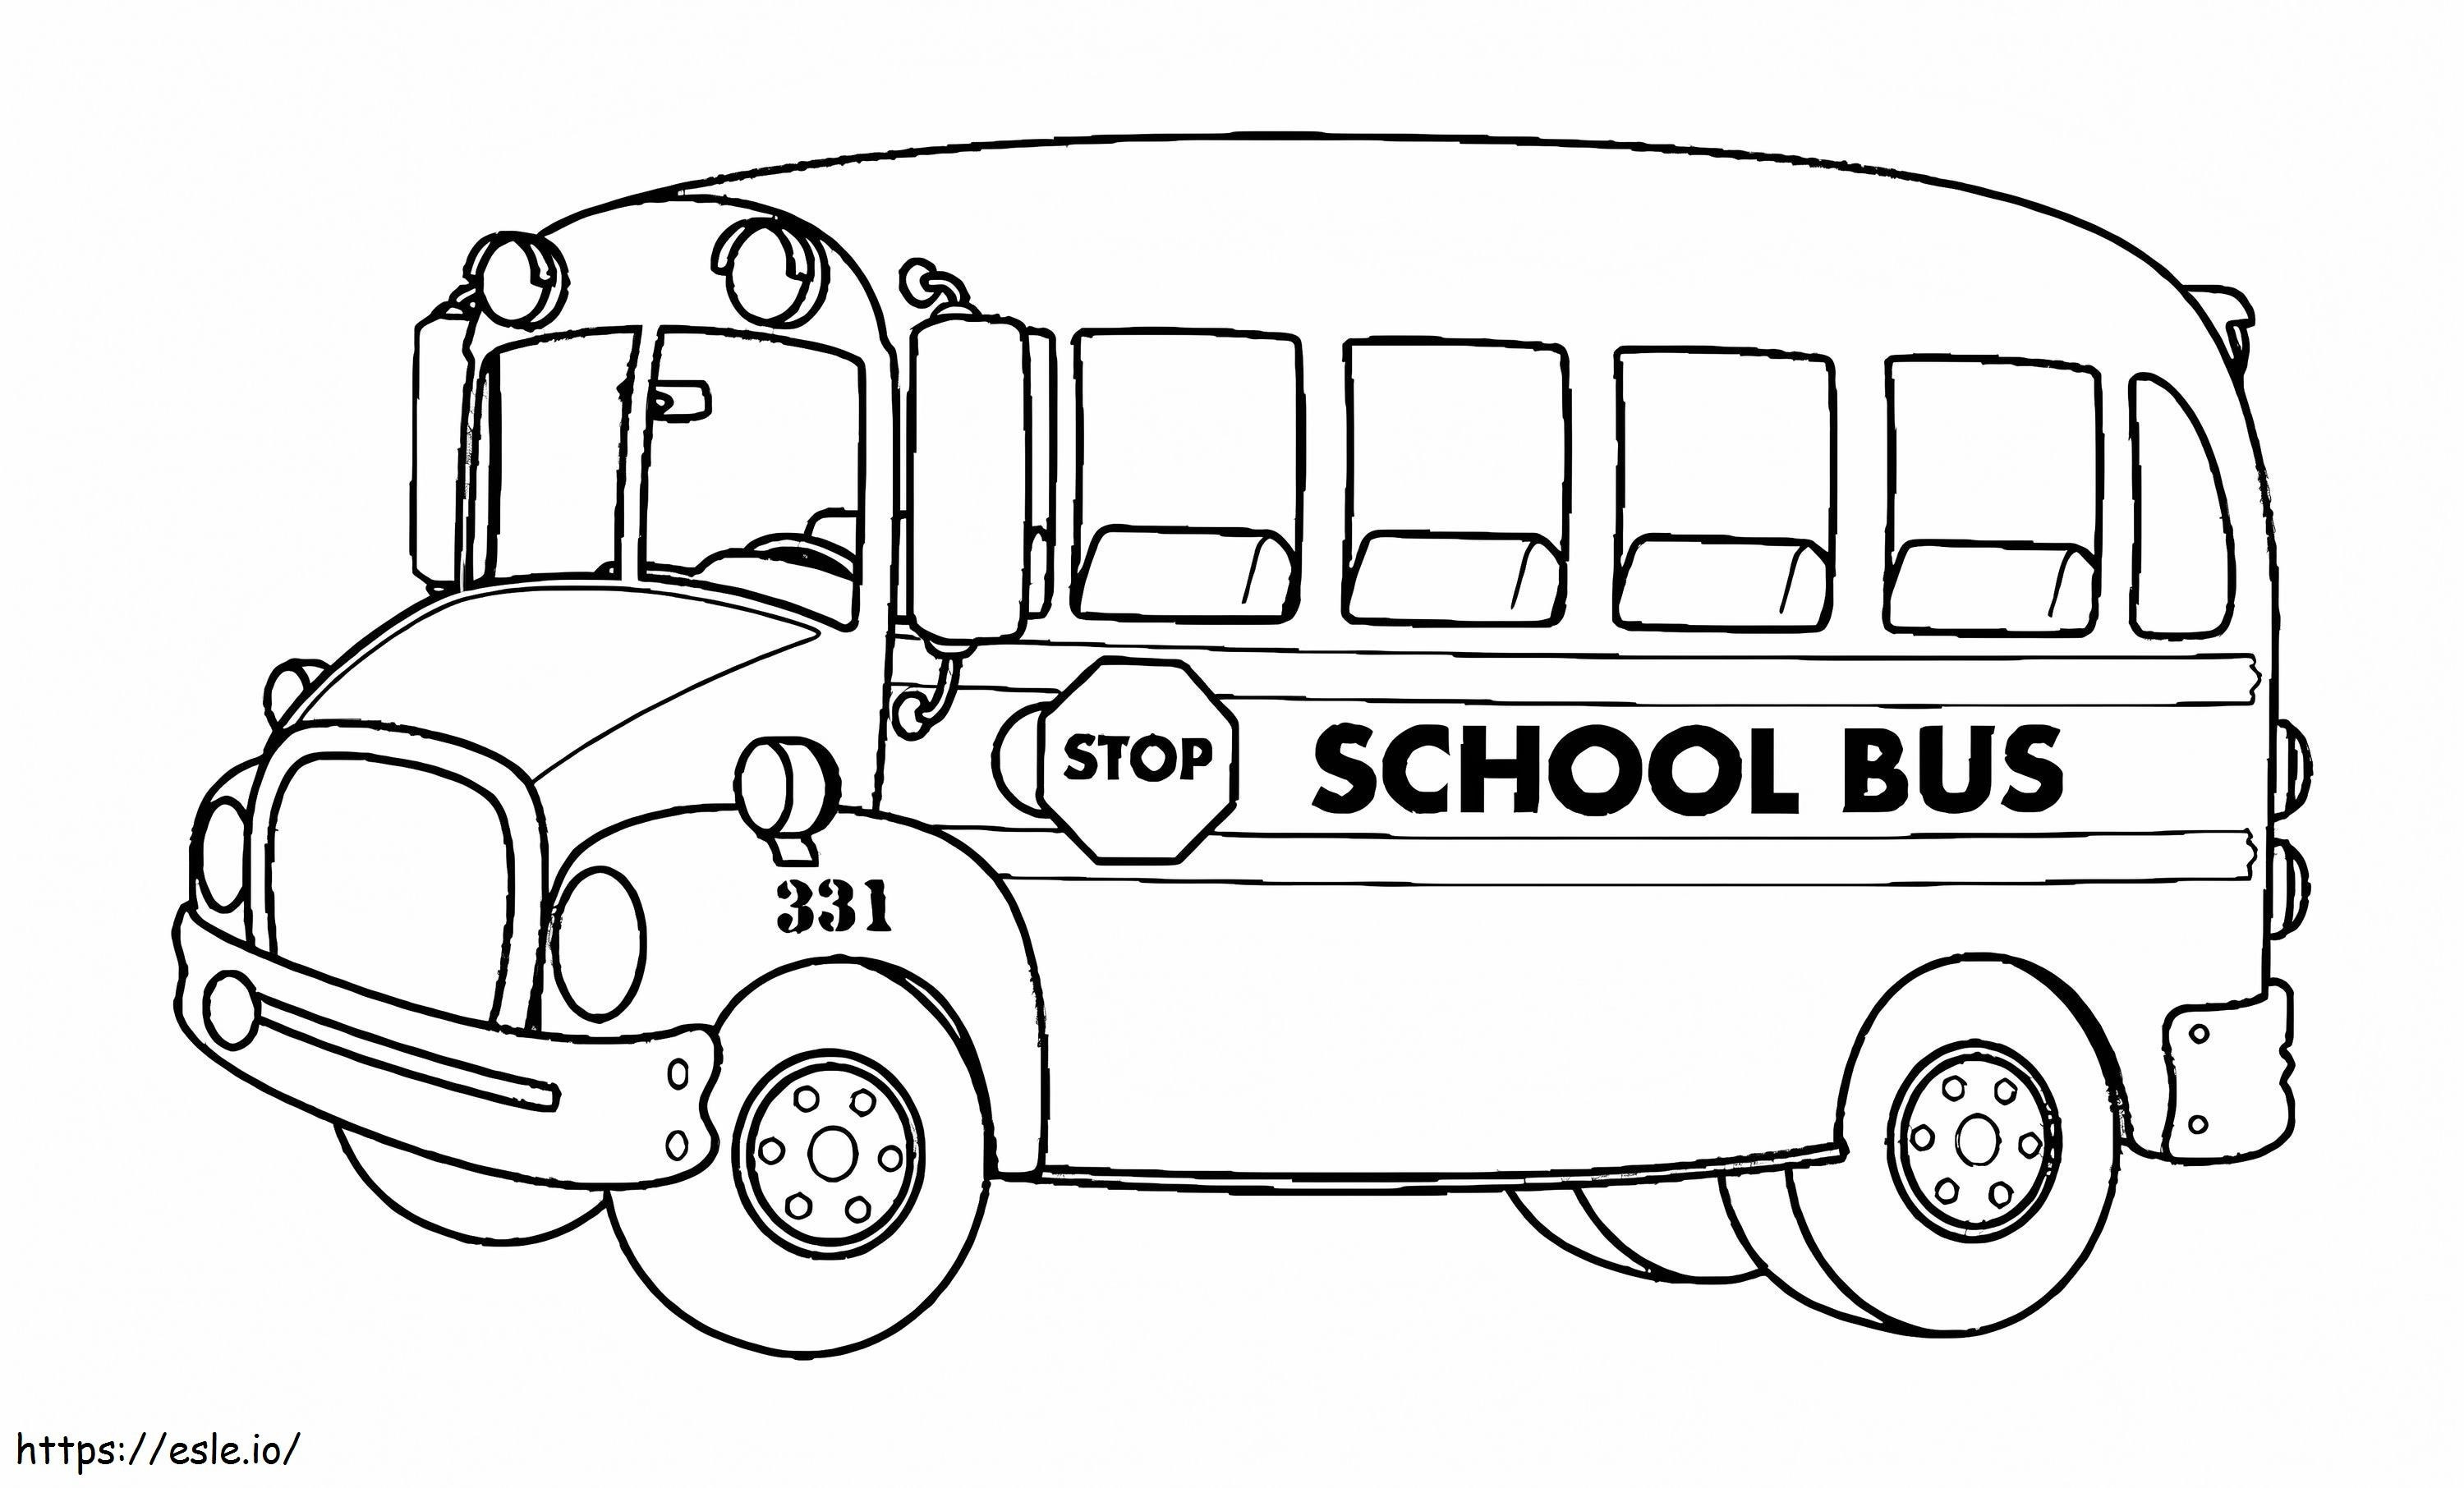 Basic School Bus coloring page